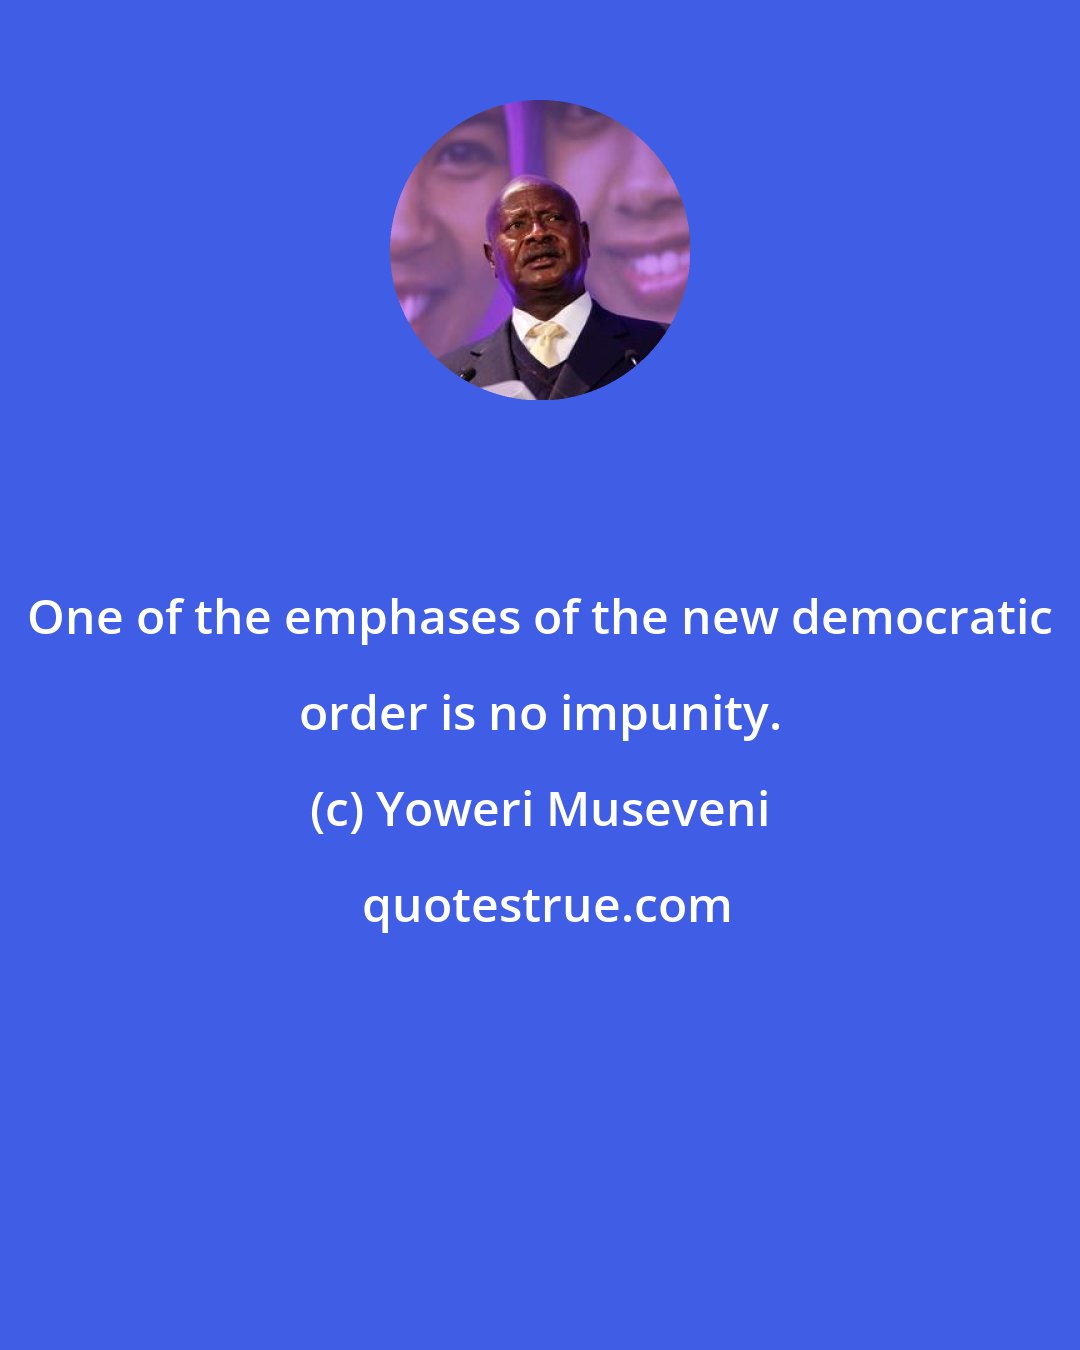 Yoweri Museveni: One of the emphases of the new democratic order is no impunity.